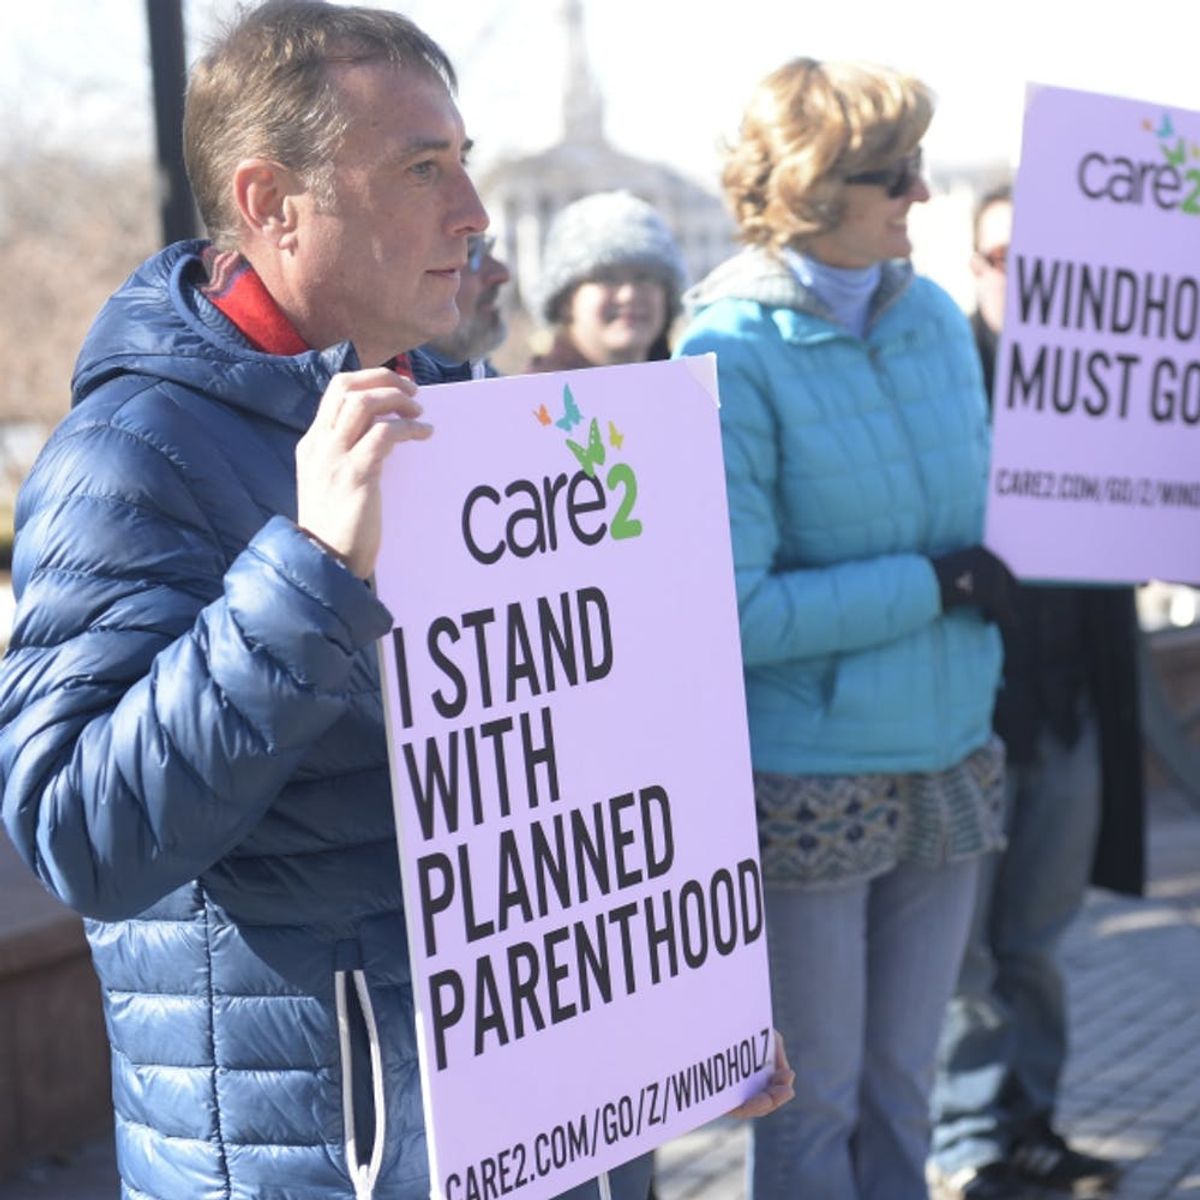 Texas Has Officially Defunded Planned Parenthood from Medicaid